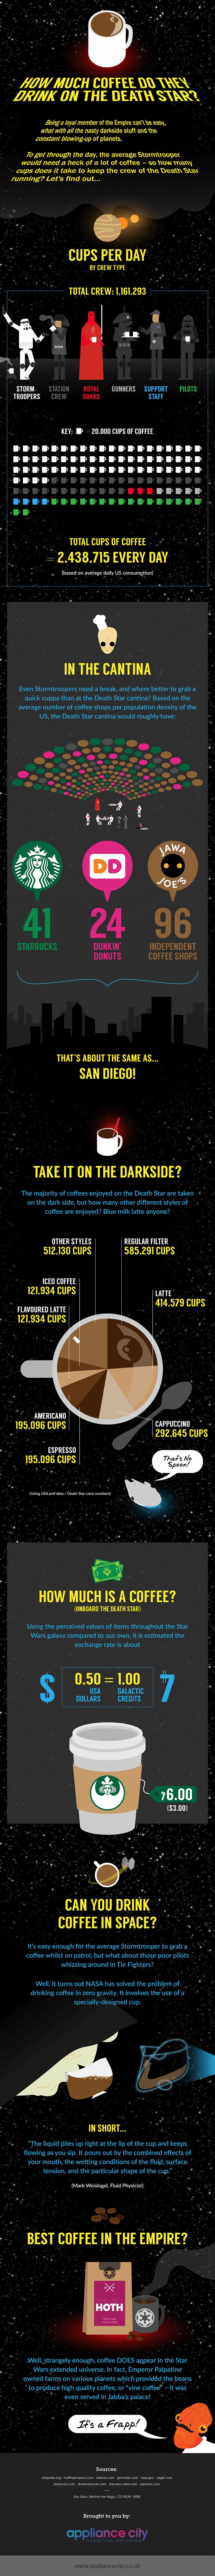 Just how much coffee is needed to power the Death Star anyway?